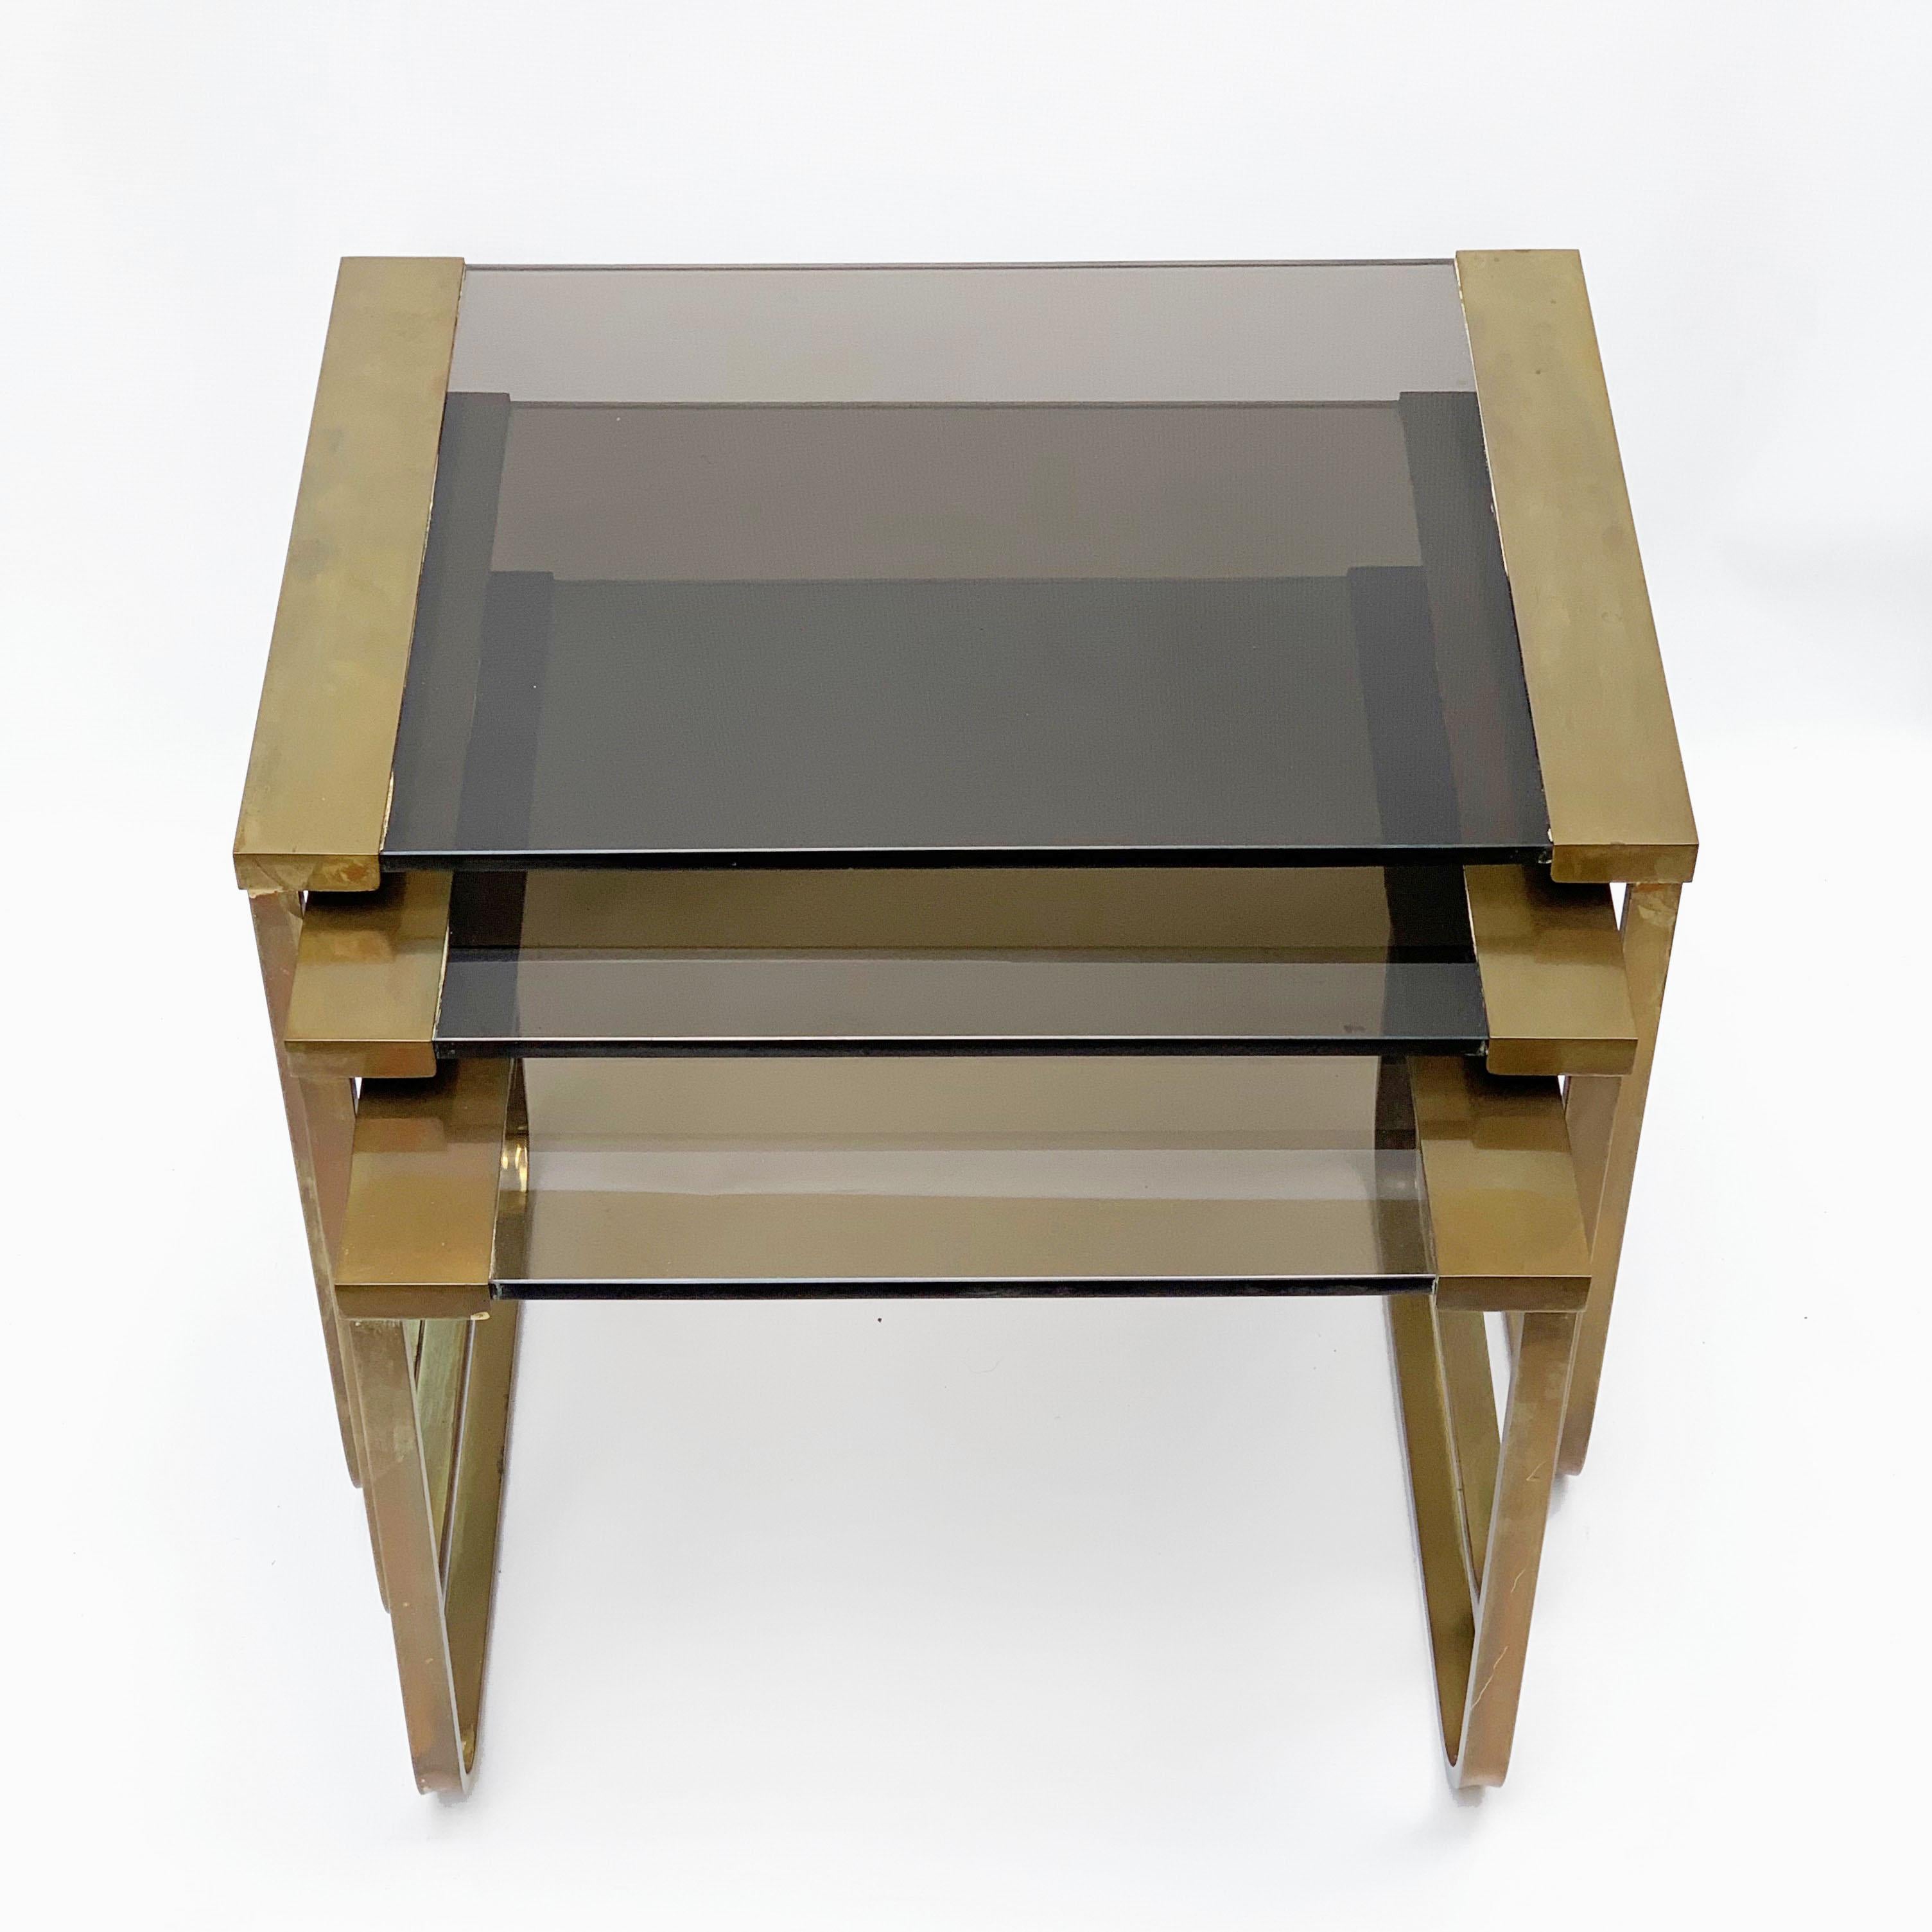 Beautiful set of three interlocking tables in satin brass and smoked glass.
Solid burnished brass. Thick glass with no chipping
Suitable for any type of furniture.

The measurements of the three tables are:
Large 15.94x 21.85x16.14
Medium